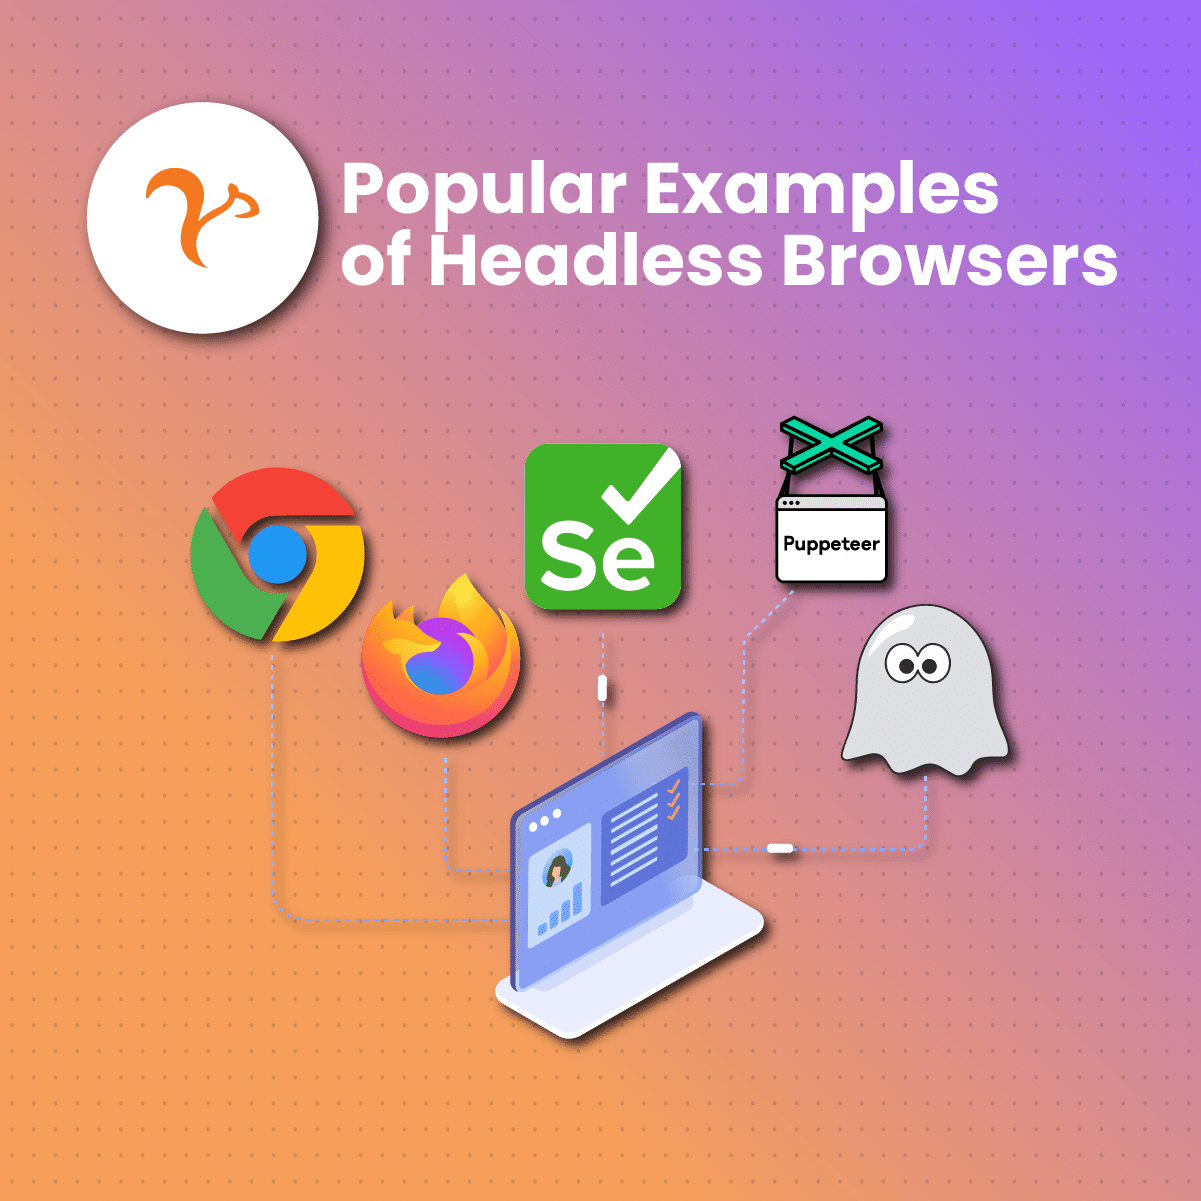 Popular Examples of Headless Browsers